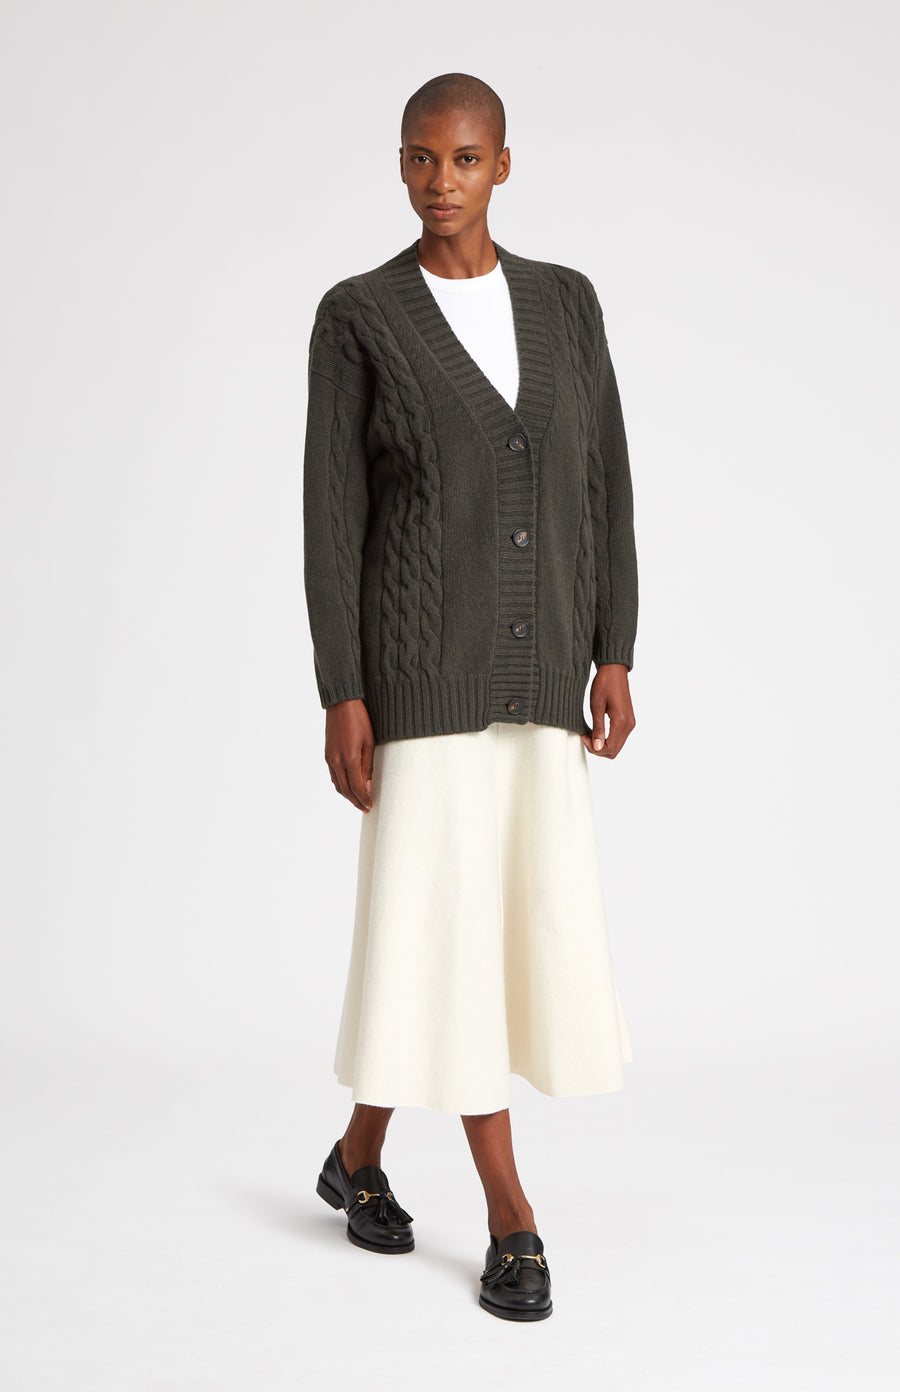 Superfine Wool Cardigan with Cable detail in Khaki on model full length - Pringle of Scotland